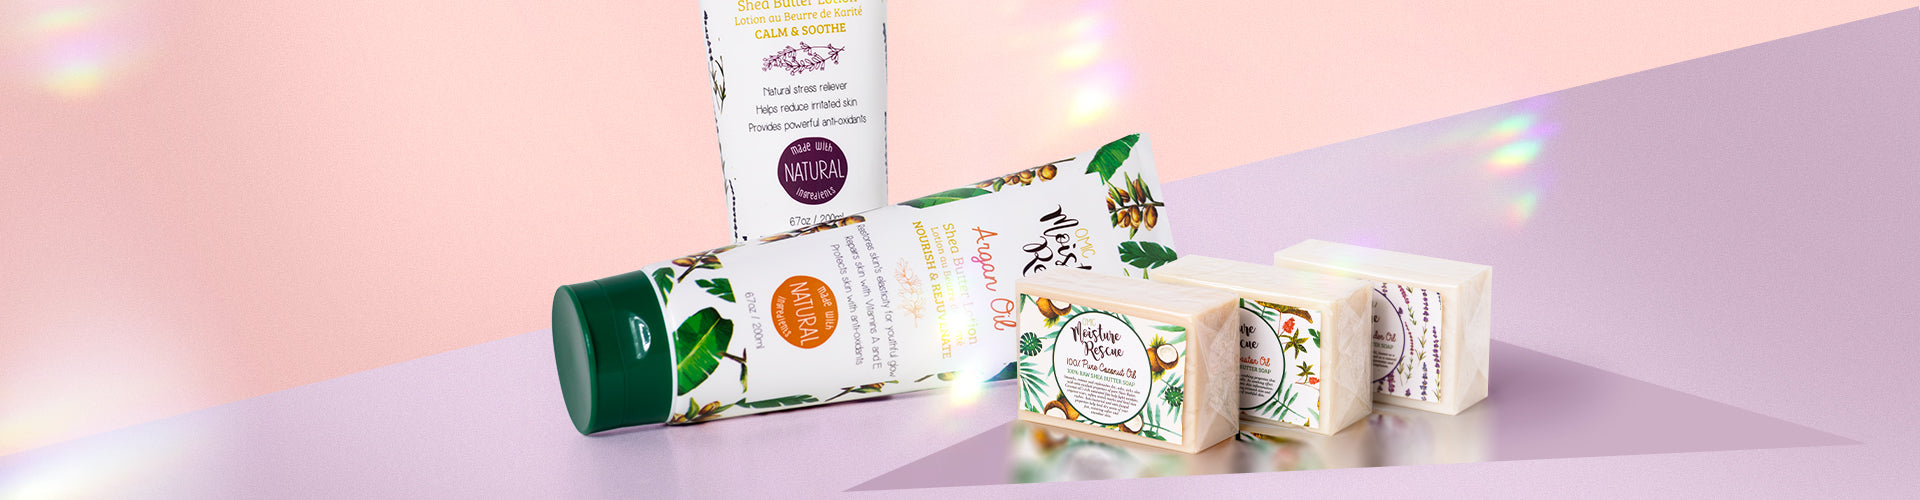 Moisture Rescue Shea Butter Soap with Argan Oil – Mitchell Brands Europe